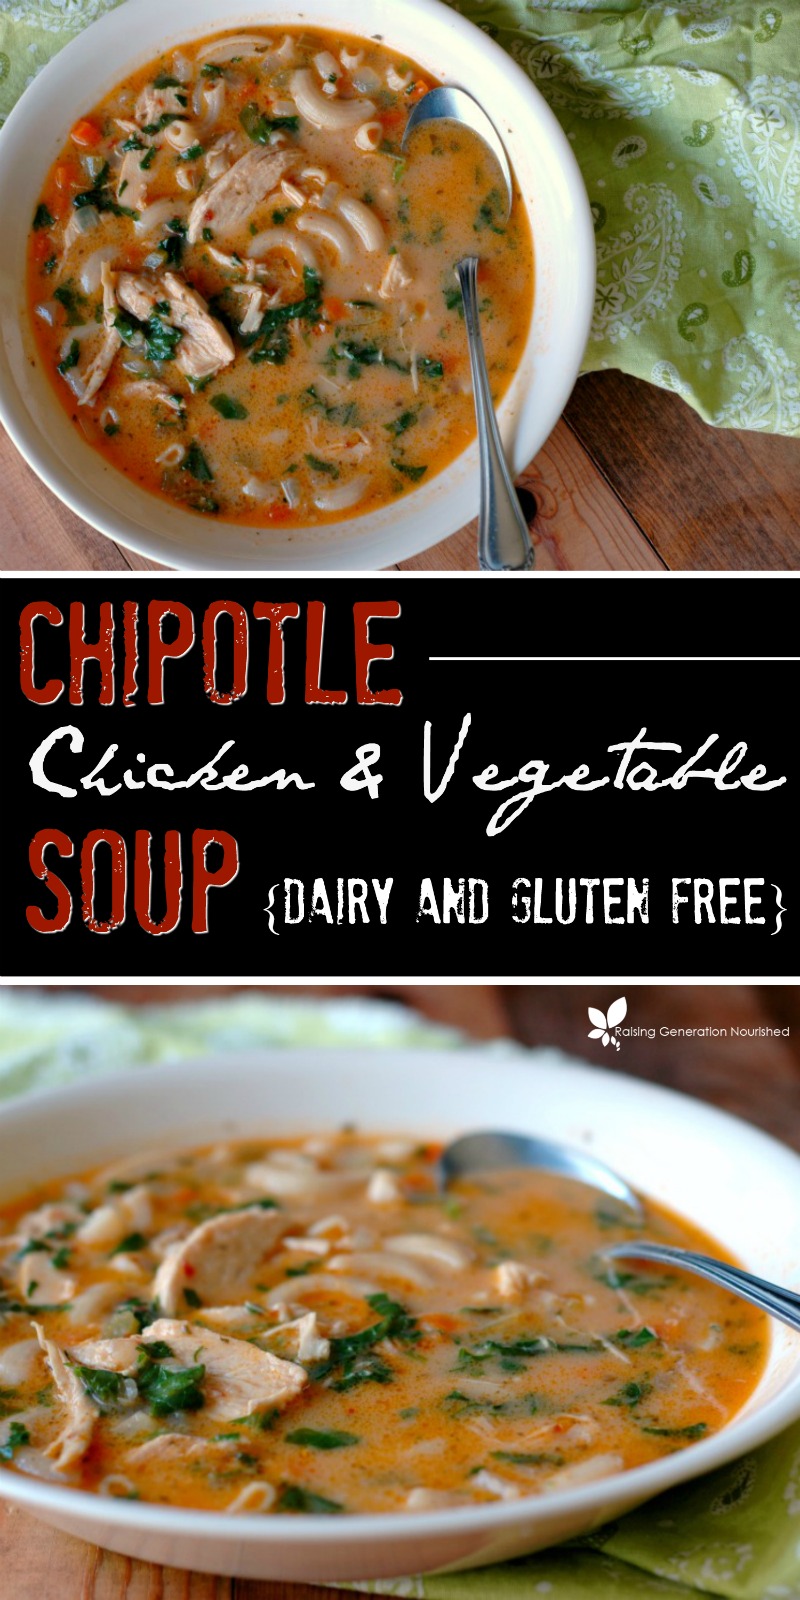 Instant Pot Chipotle Chicken and Vegetable Soup :: Dairy Free and Gluten Free :: Stovetop Directions Included Too!